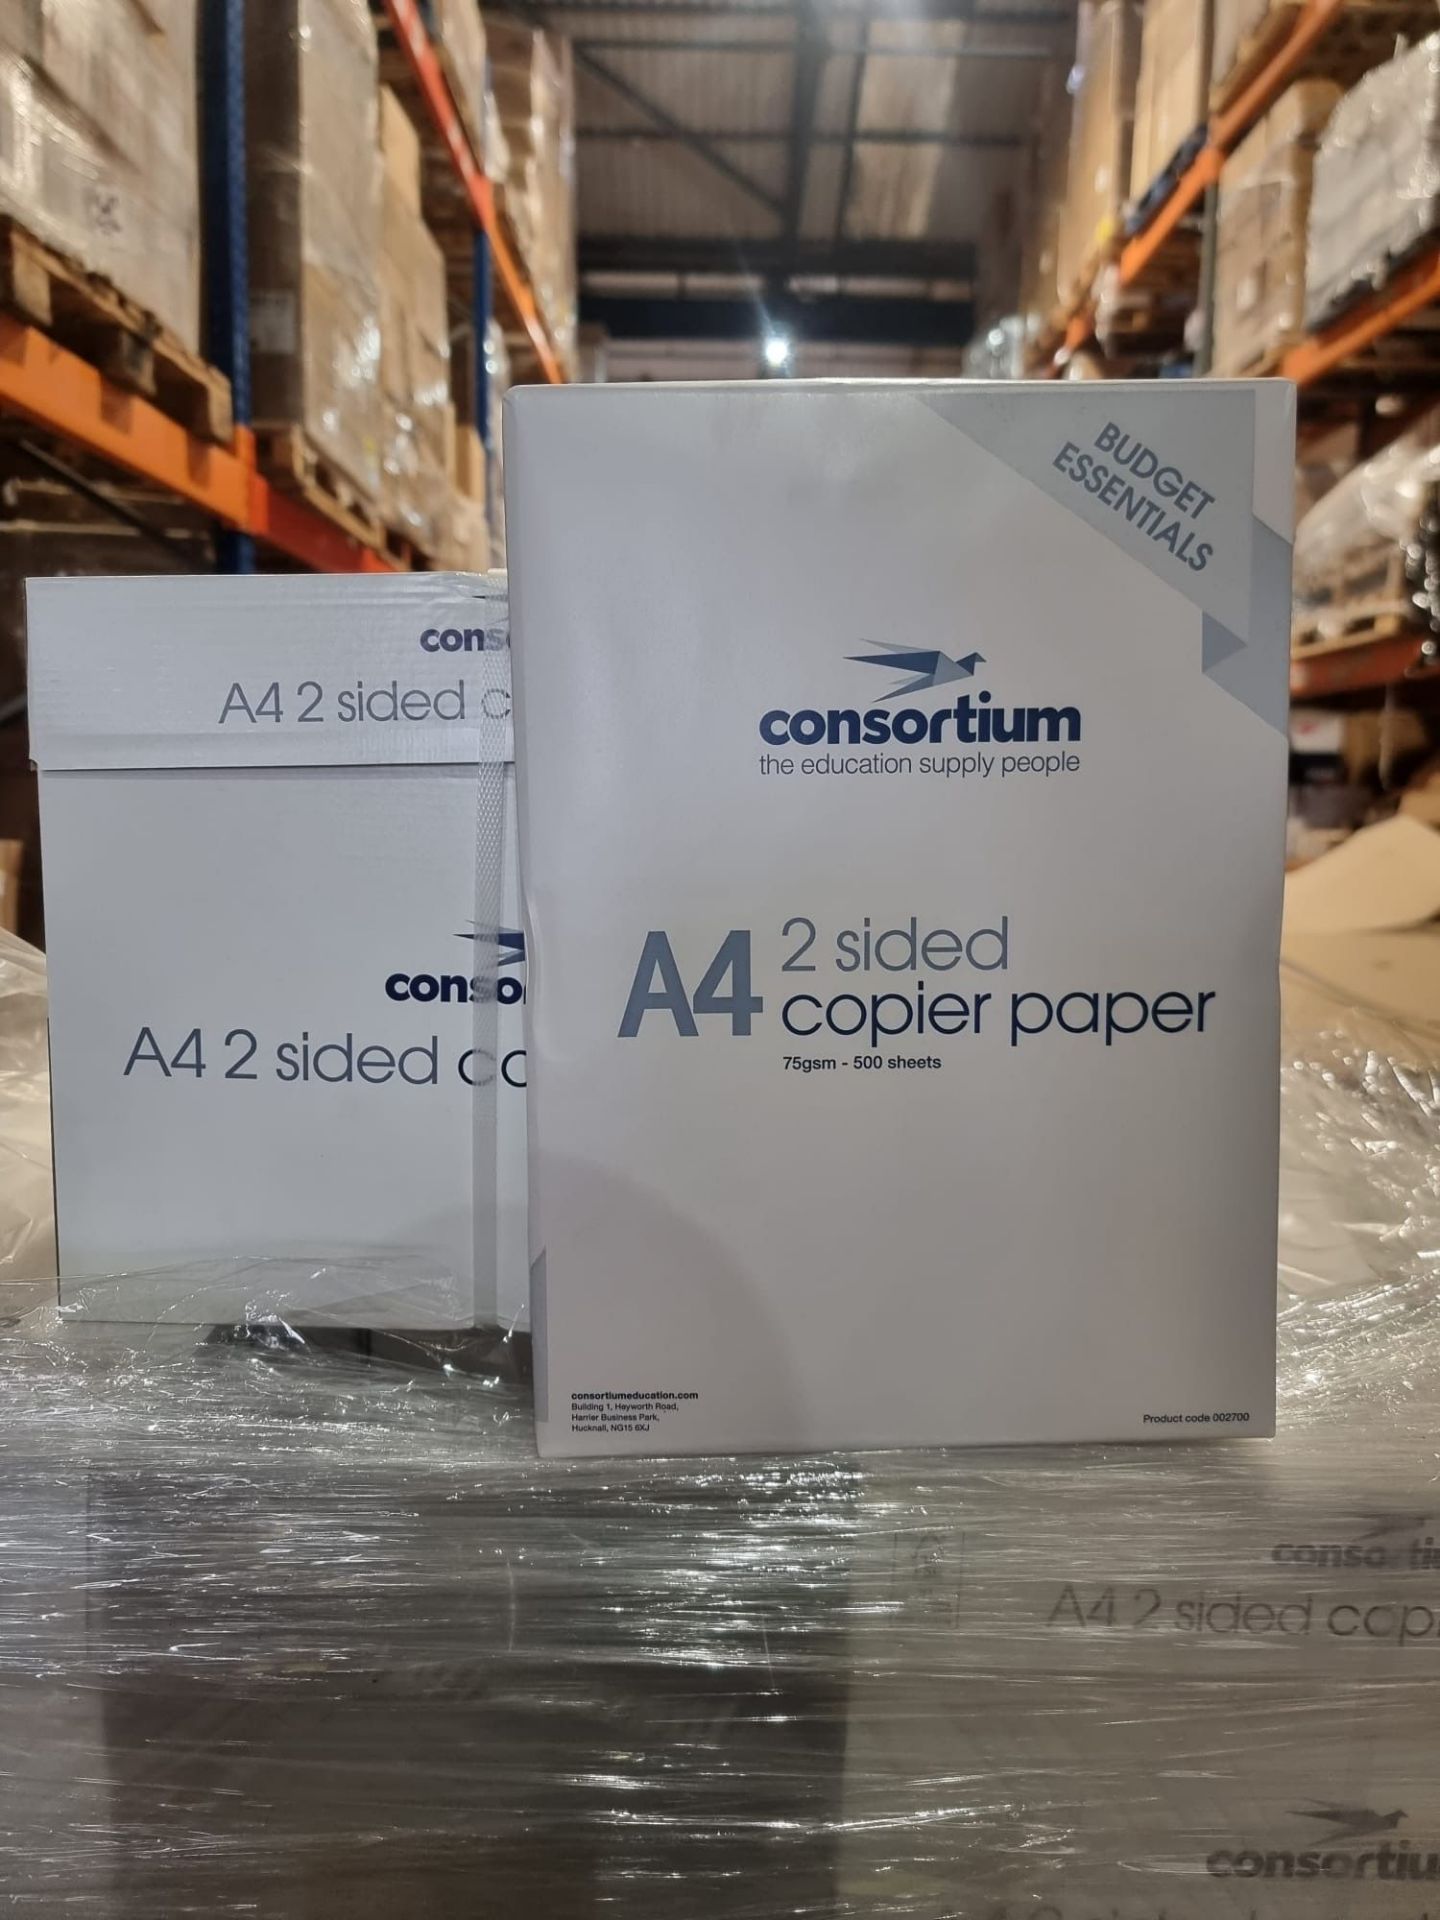 TRADE LOT 100 x New Reems of 500 75GSM Consortium A4 Double Sided Copier Paper - Image 2 of 2